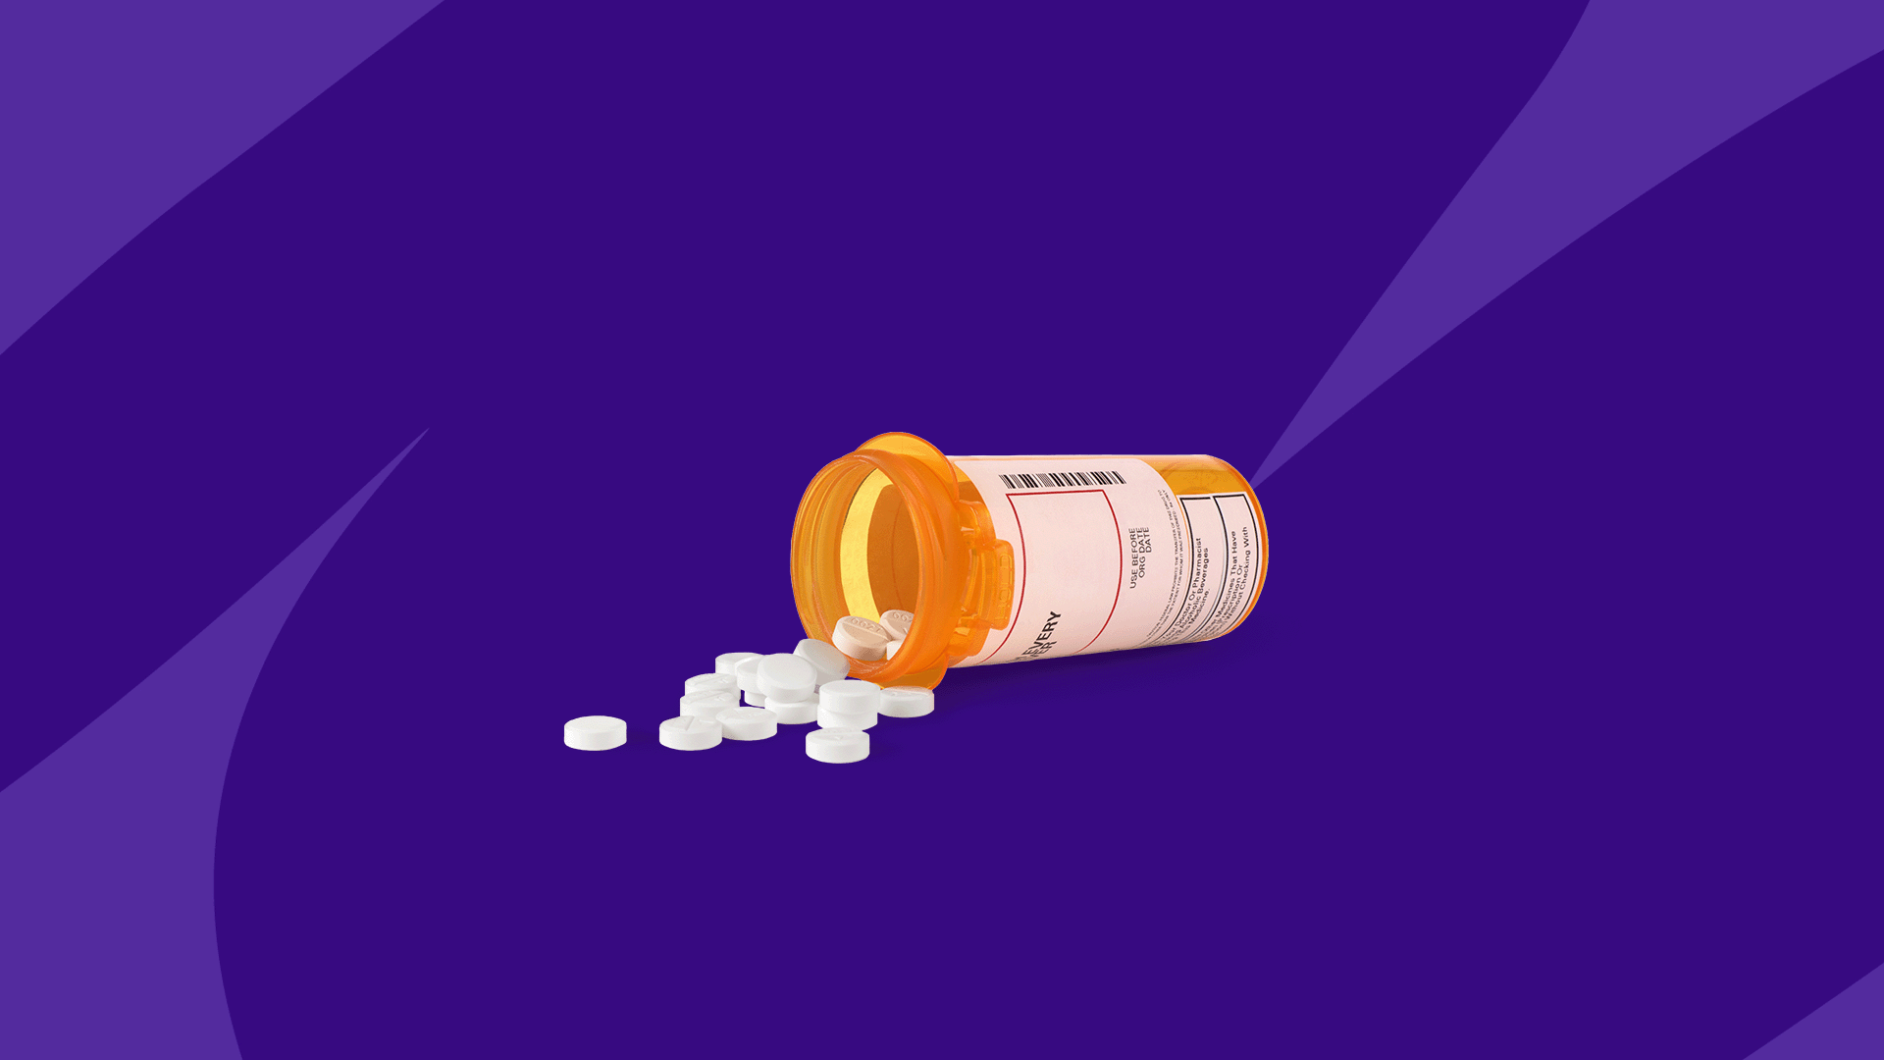 Spilled Rx pill bottle: Trazodone for sleep